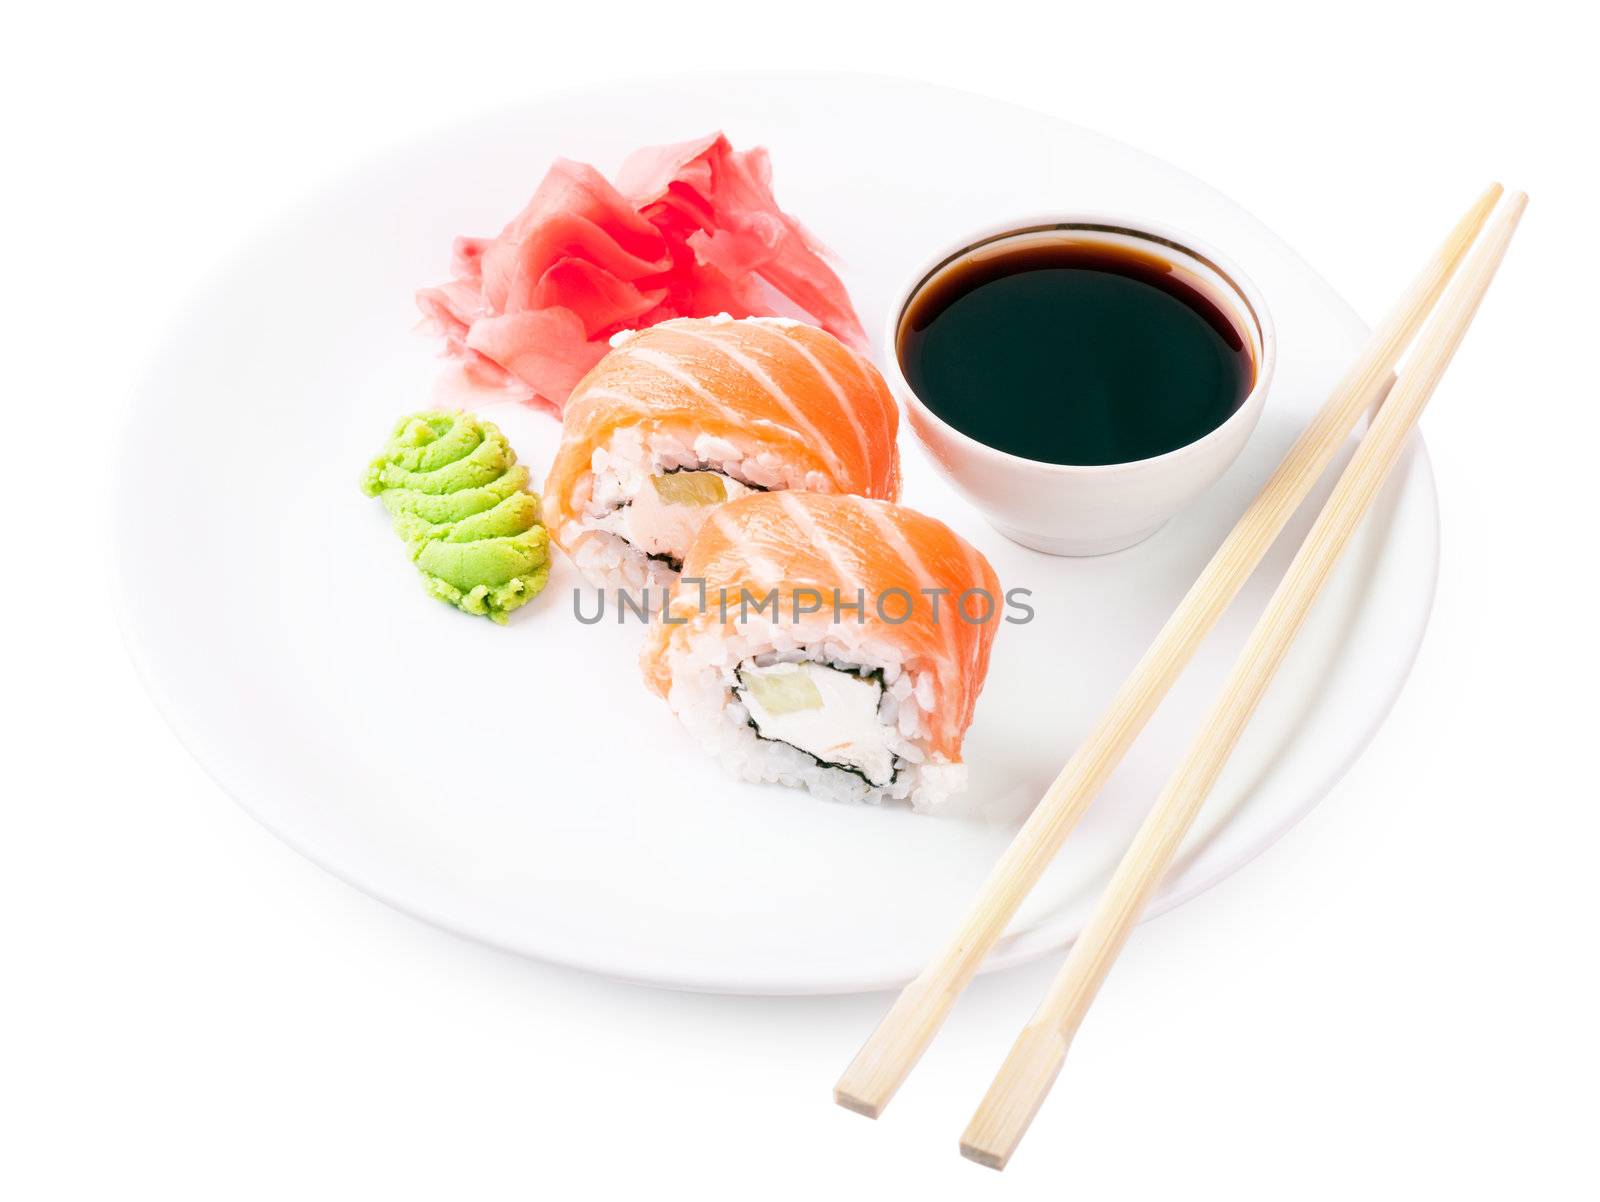 Sushi on a plate by AGorohov